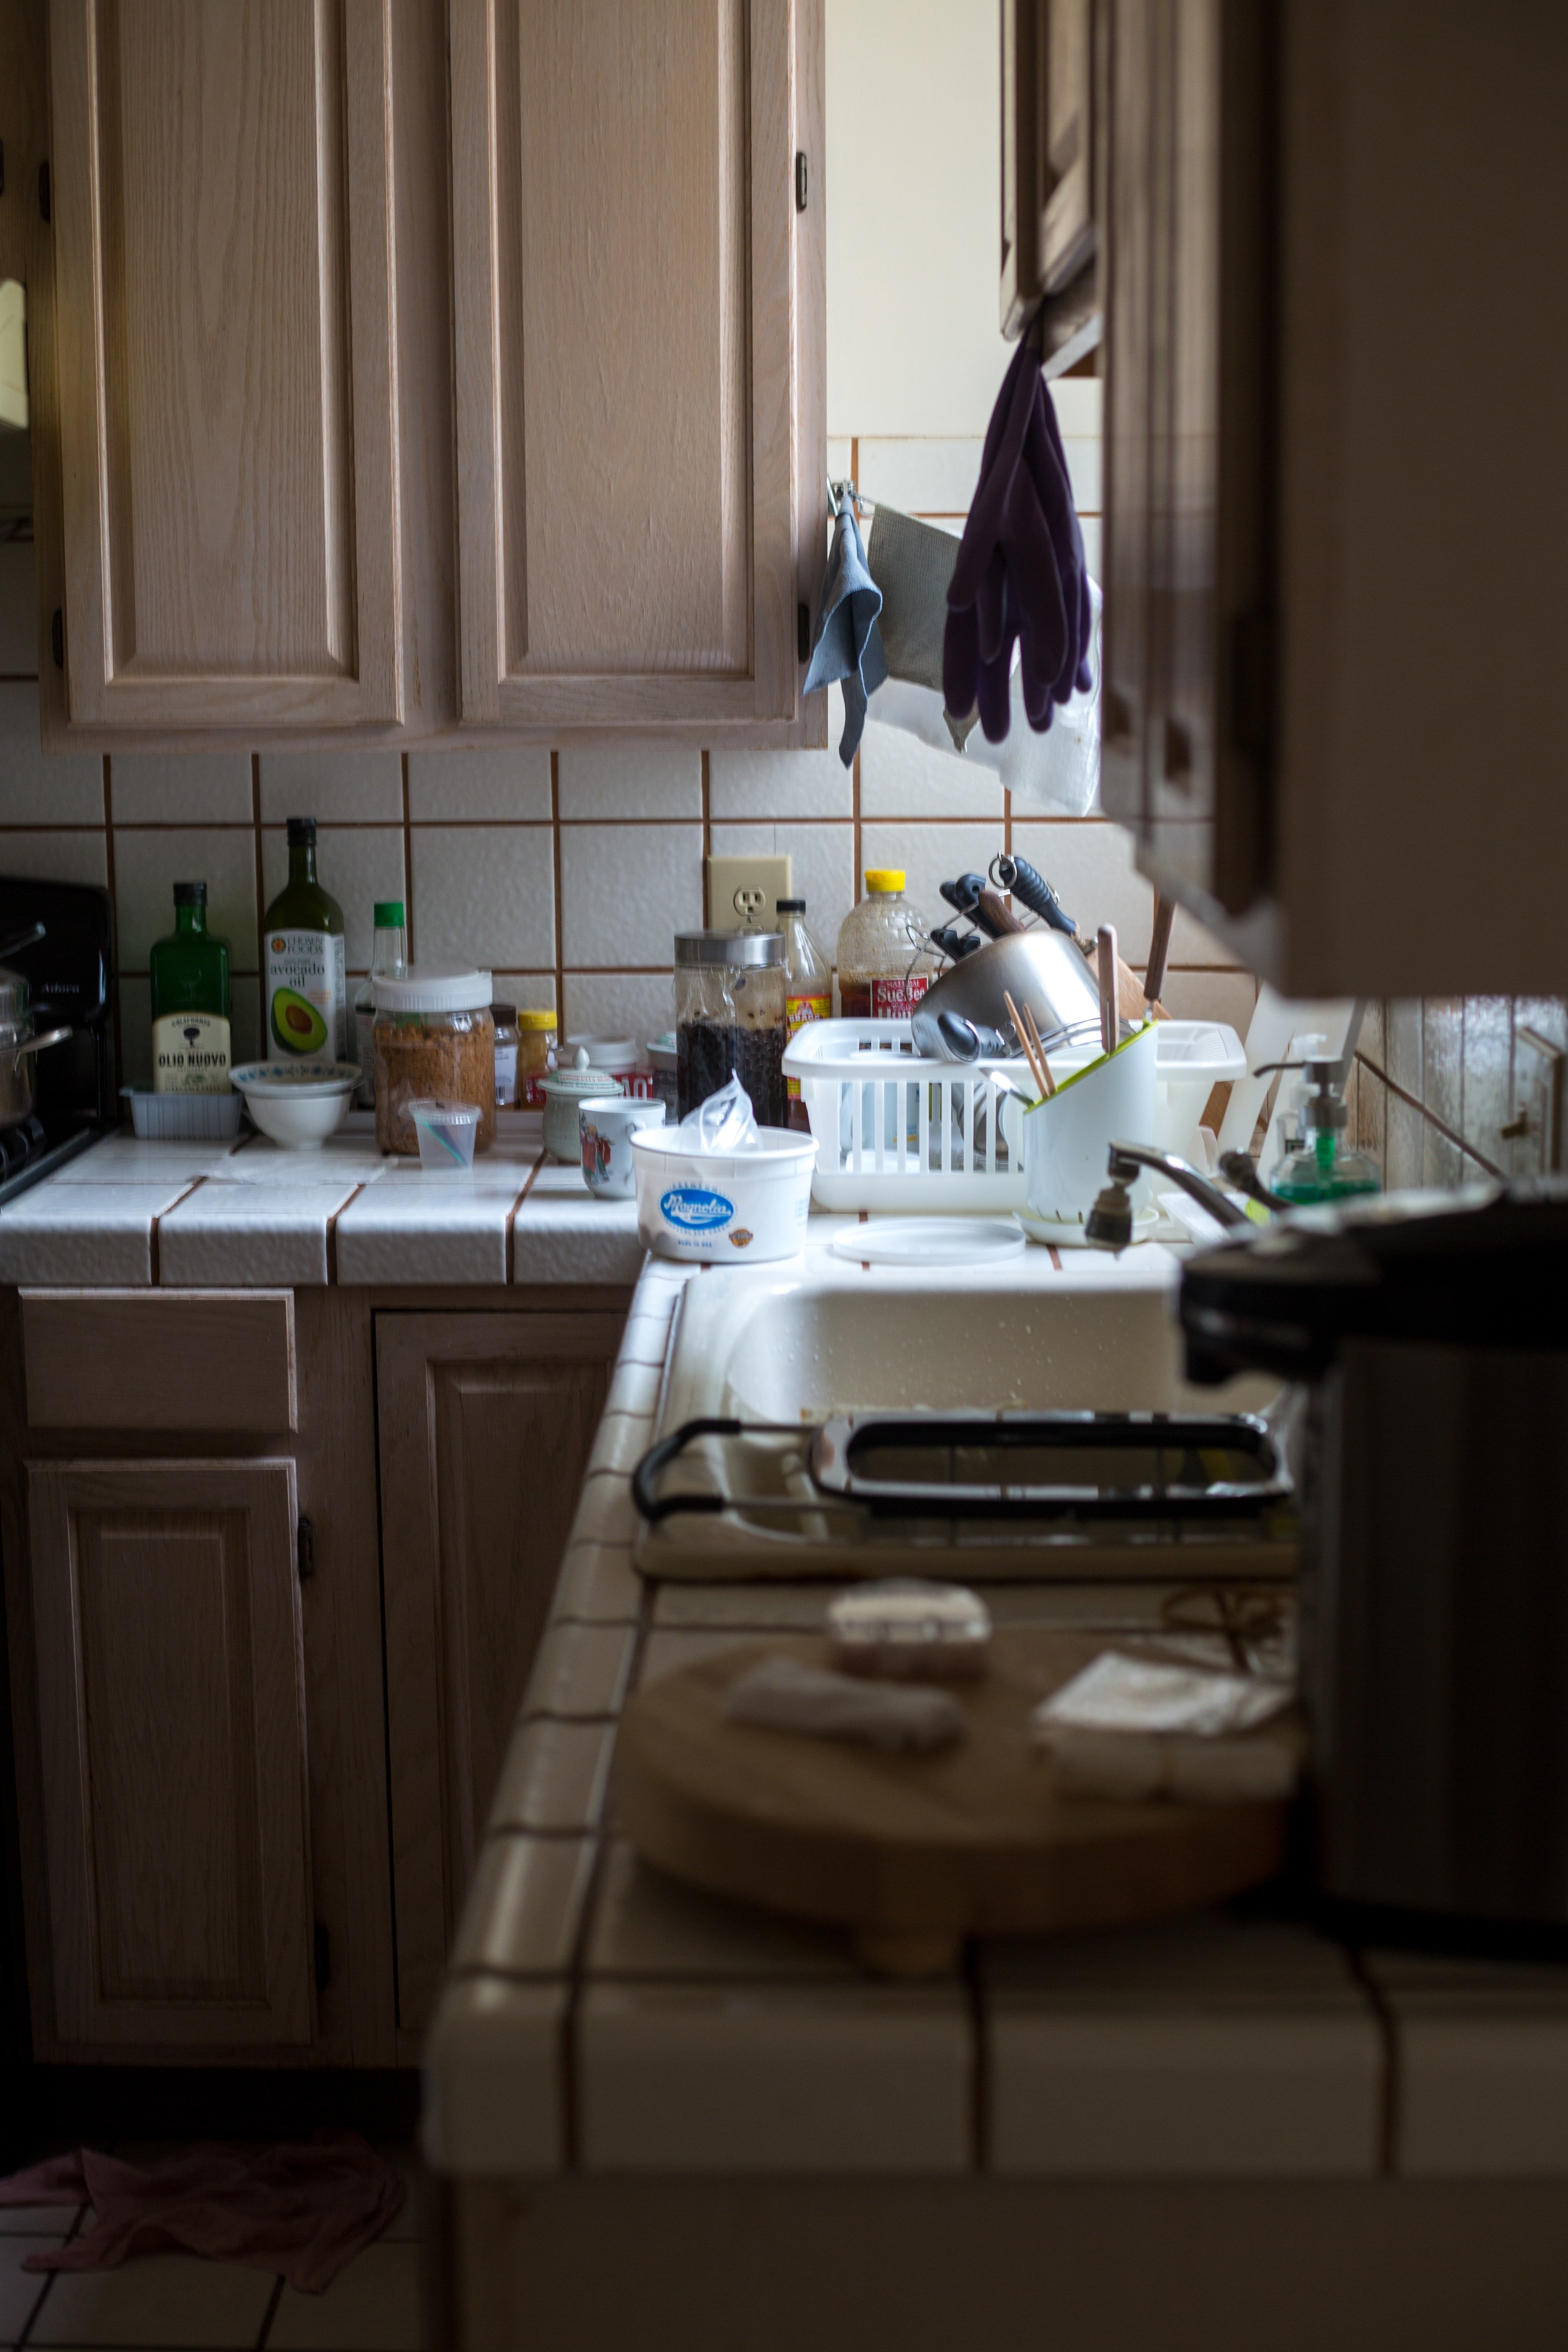 The old woman's kitchen was a mess. | Source: Unsplash